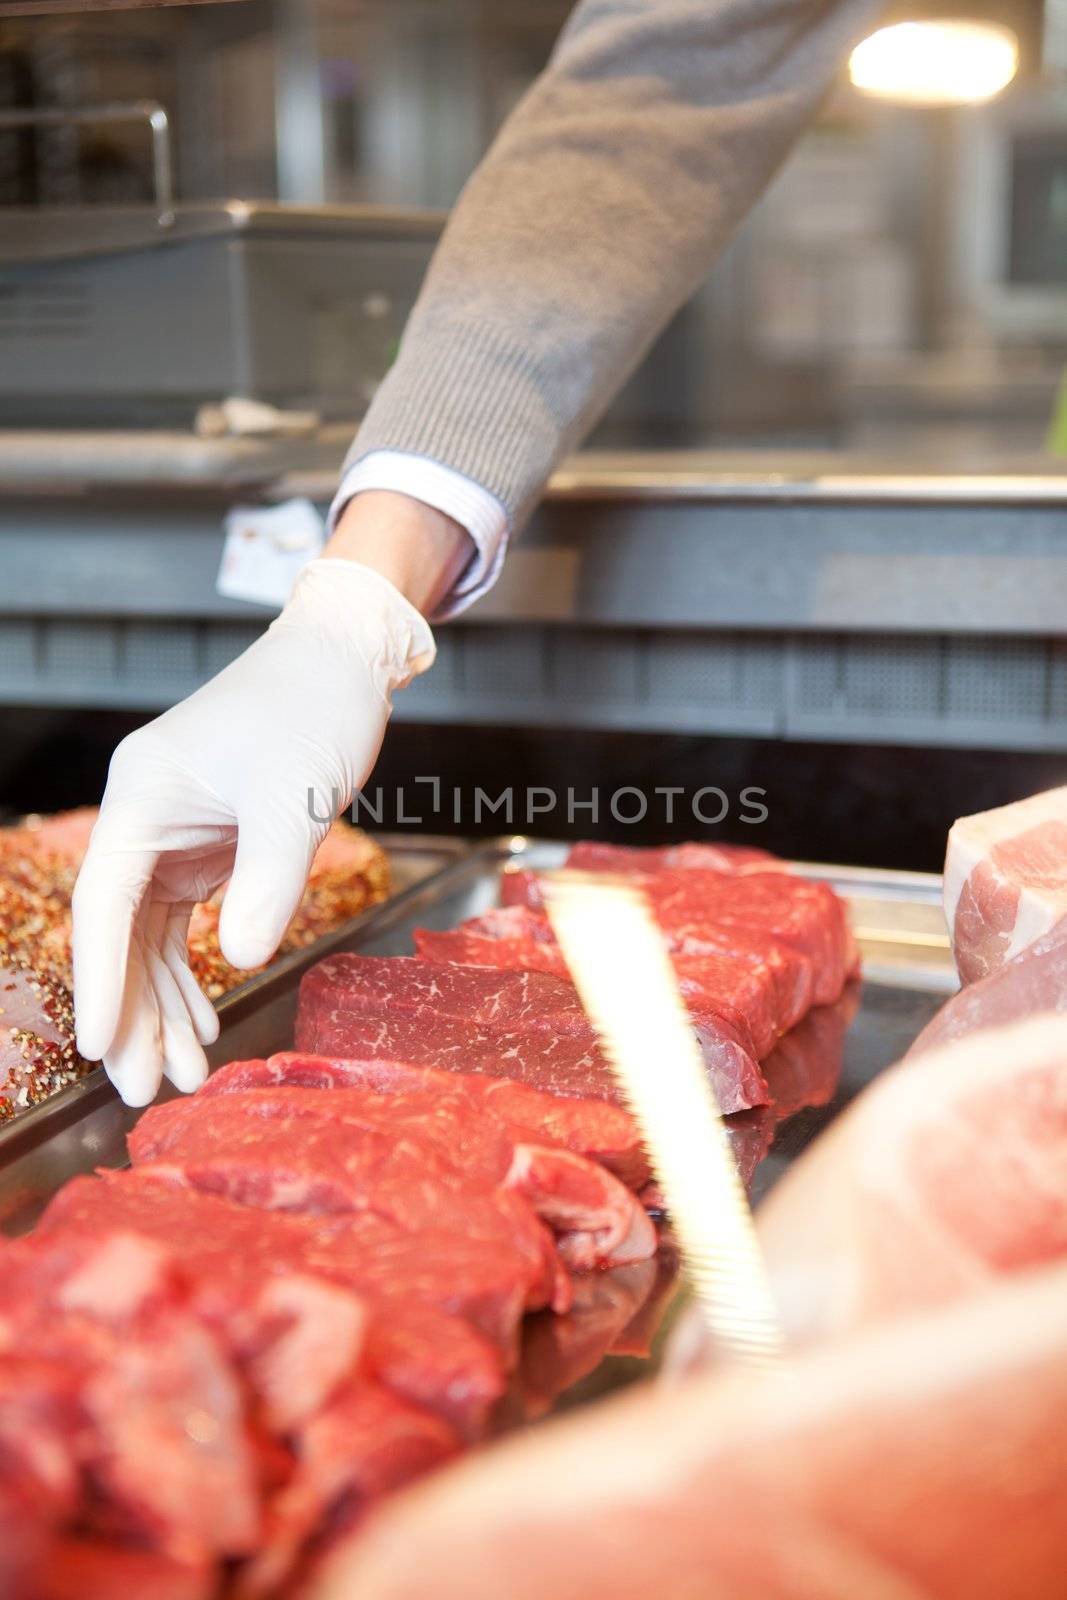 A butcher's hand reaching into a cooler picking a fresh cut of meat